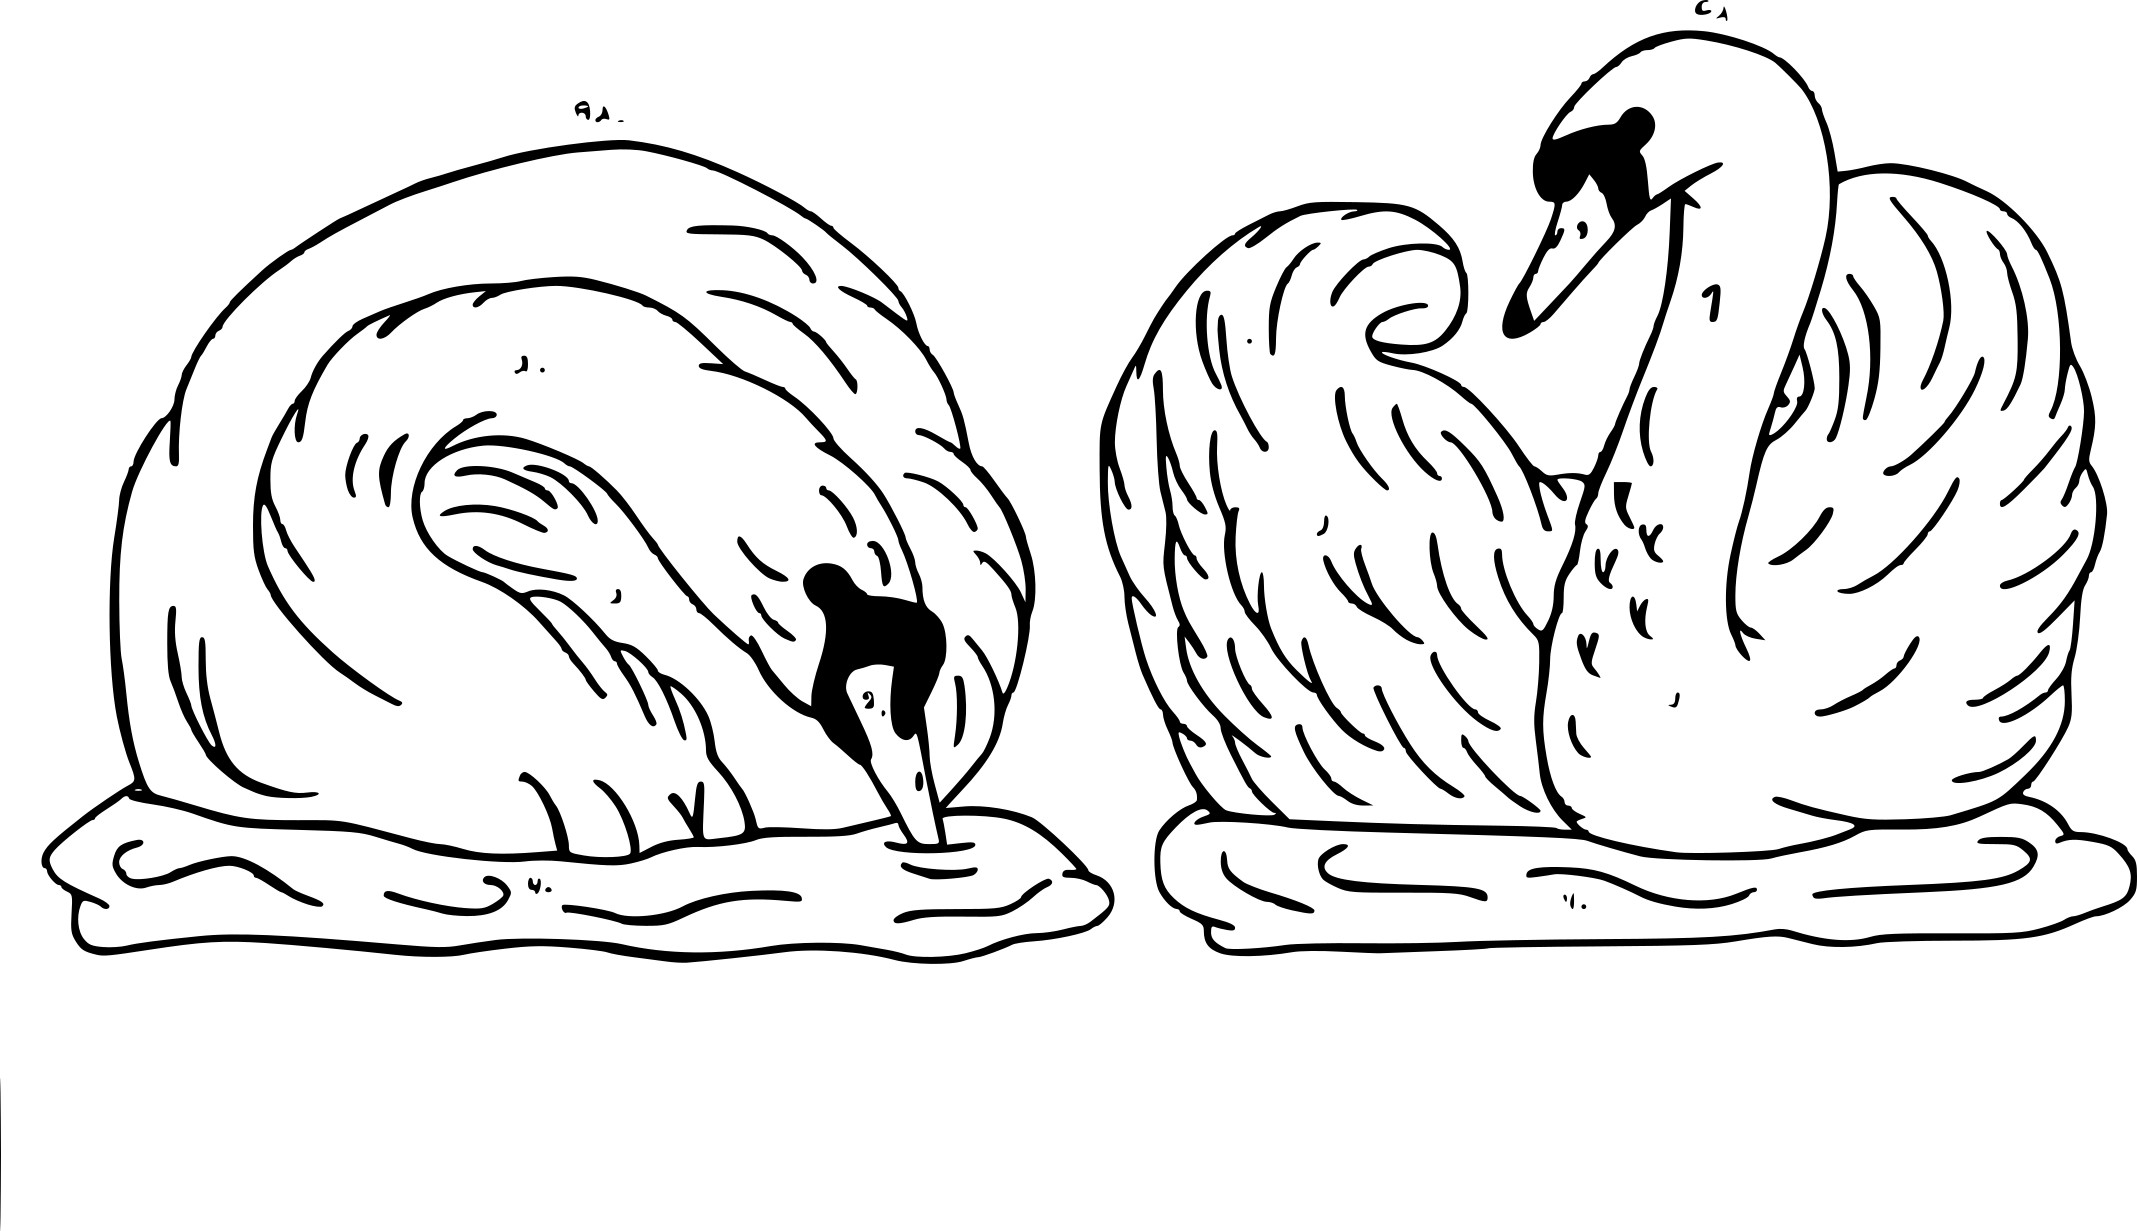 Two Swans coloring page